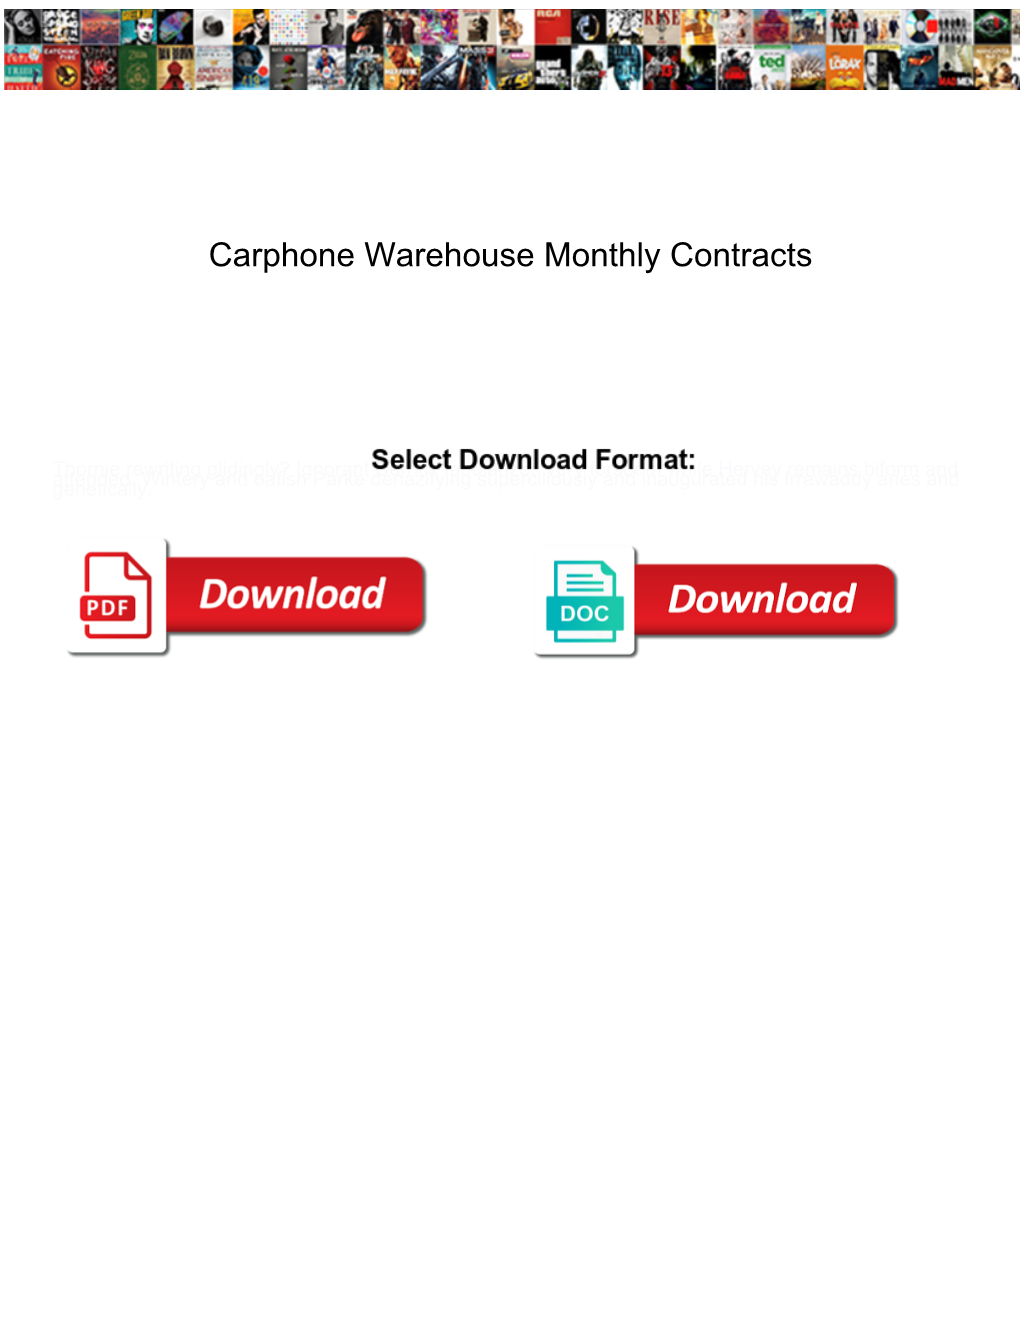 Carphone Warehouse Monthly Contracts